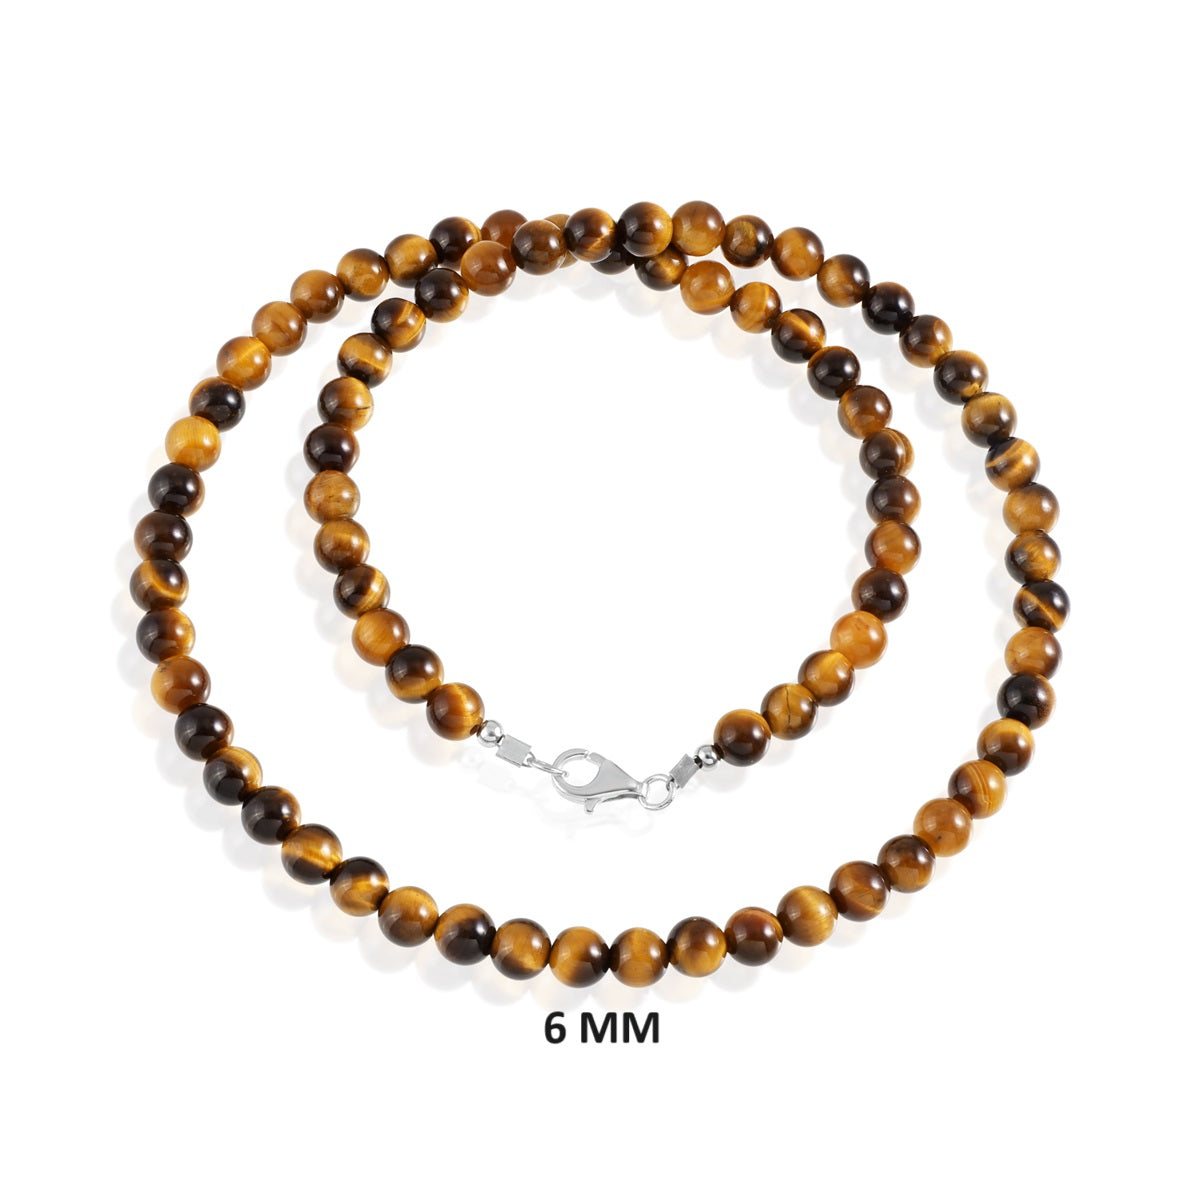 Tiger's Eye Beads Silver Necklace: Strength and Style Combined